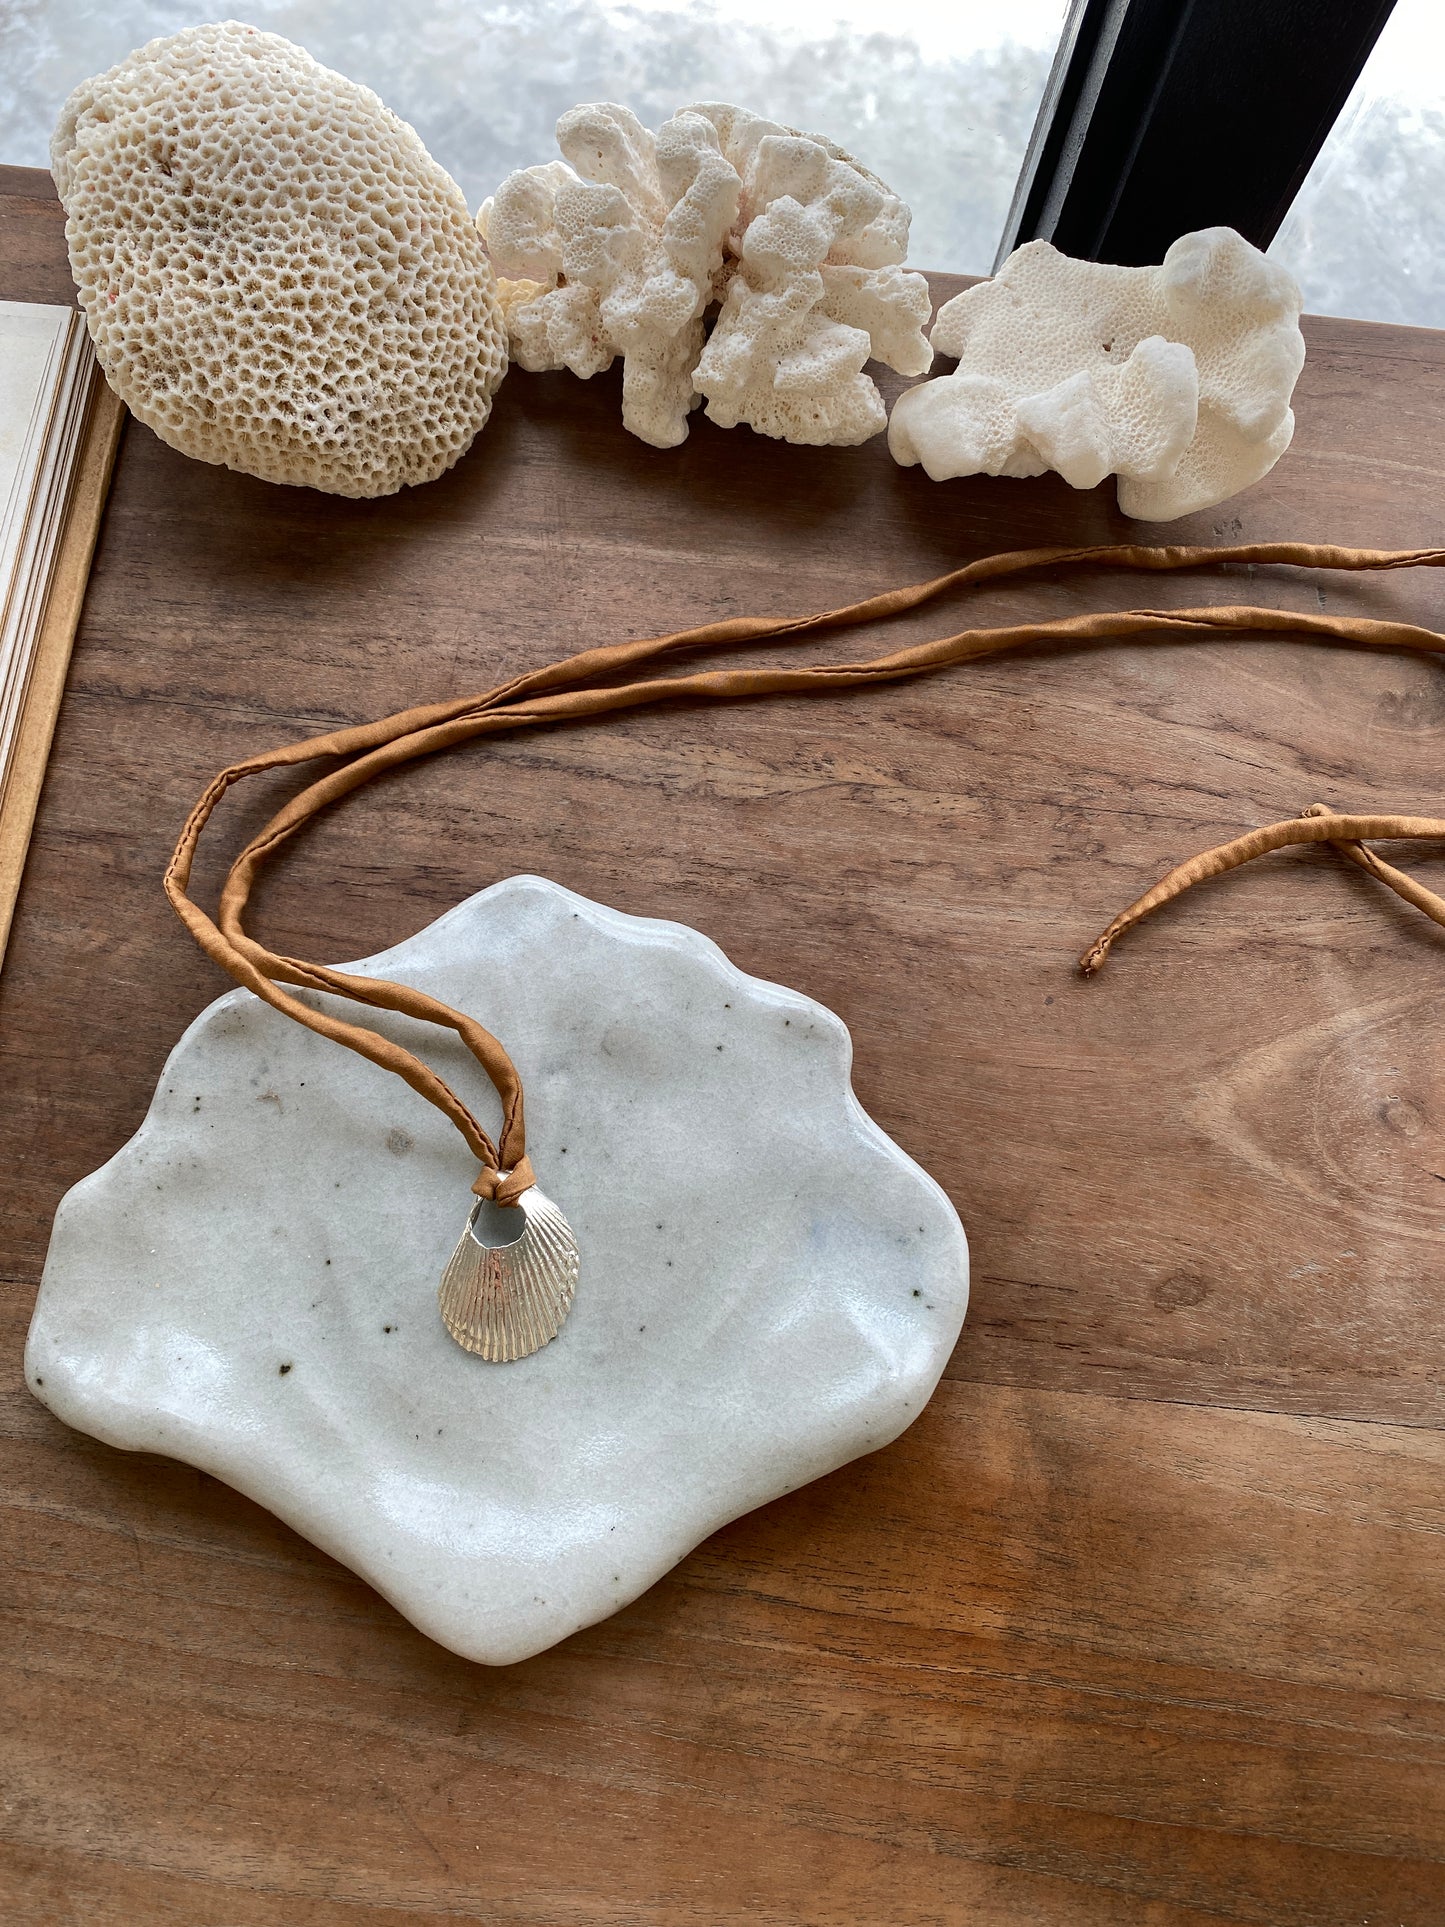 Bali Shell Necklace with Silk naturally dyed Cord